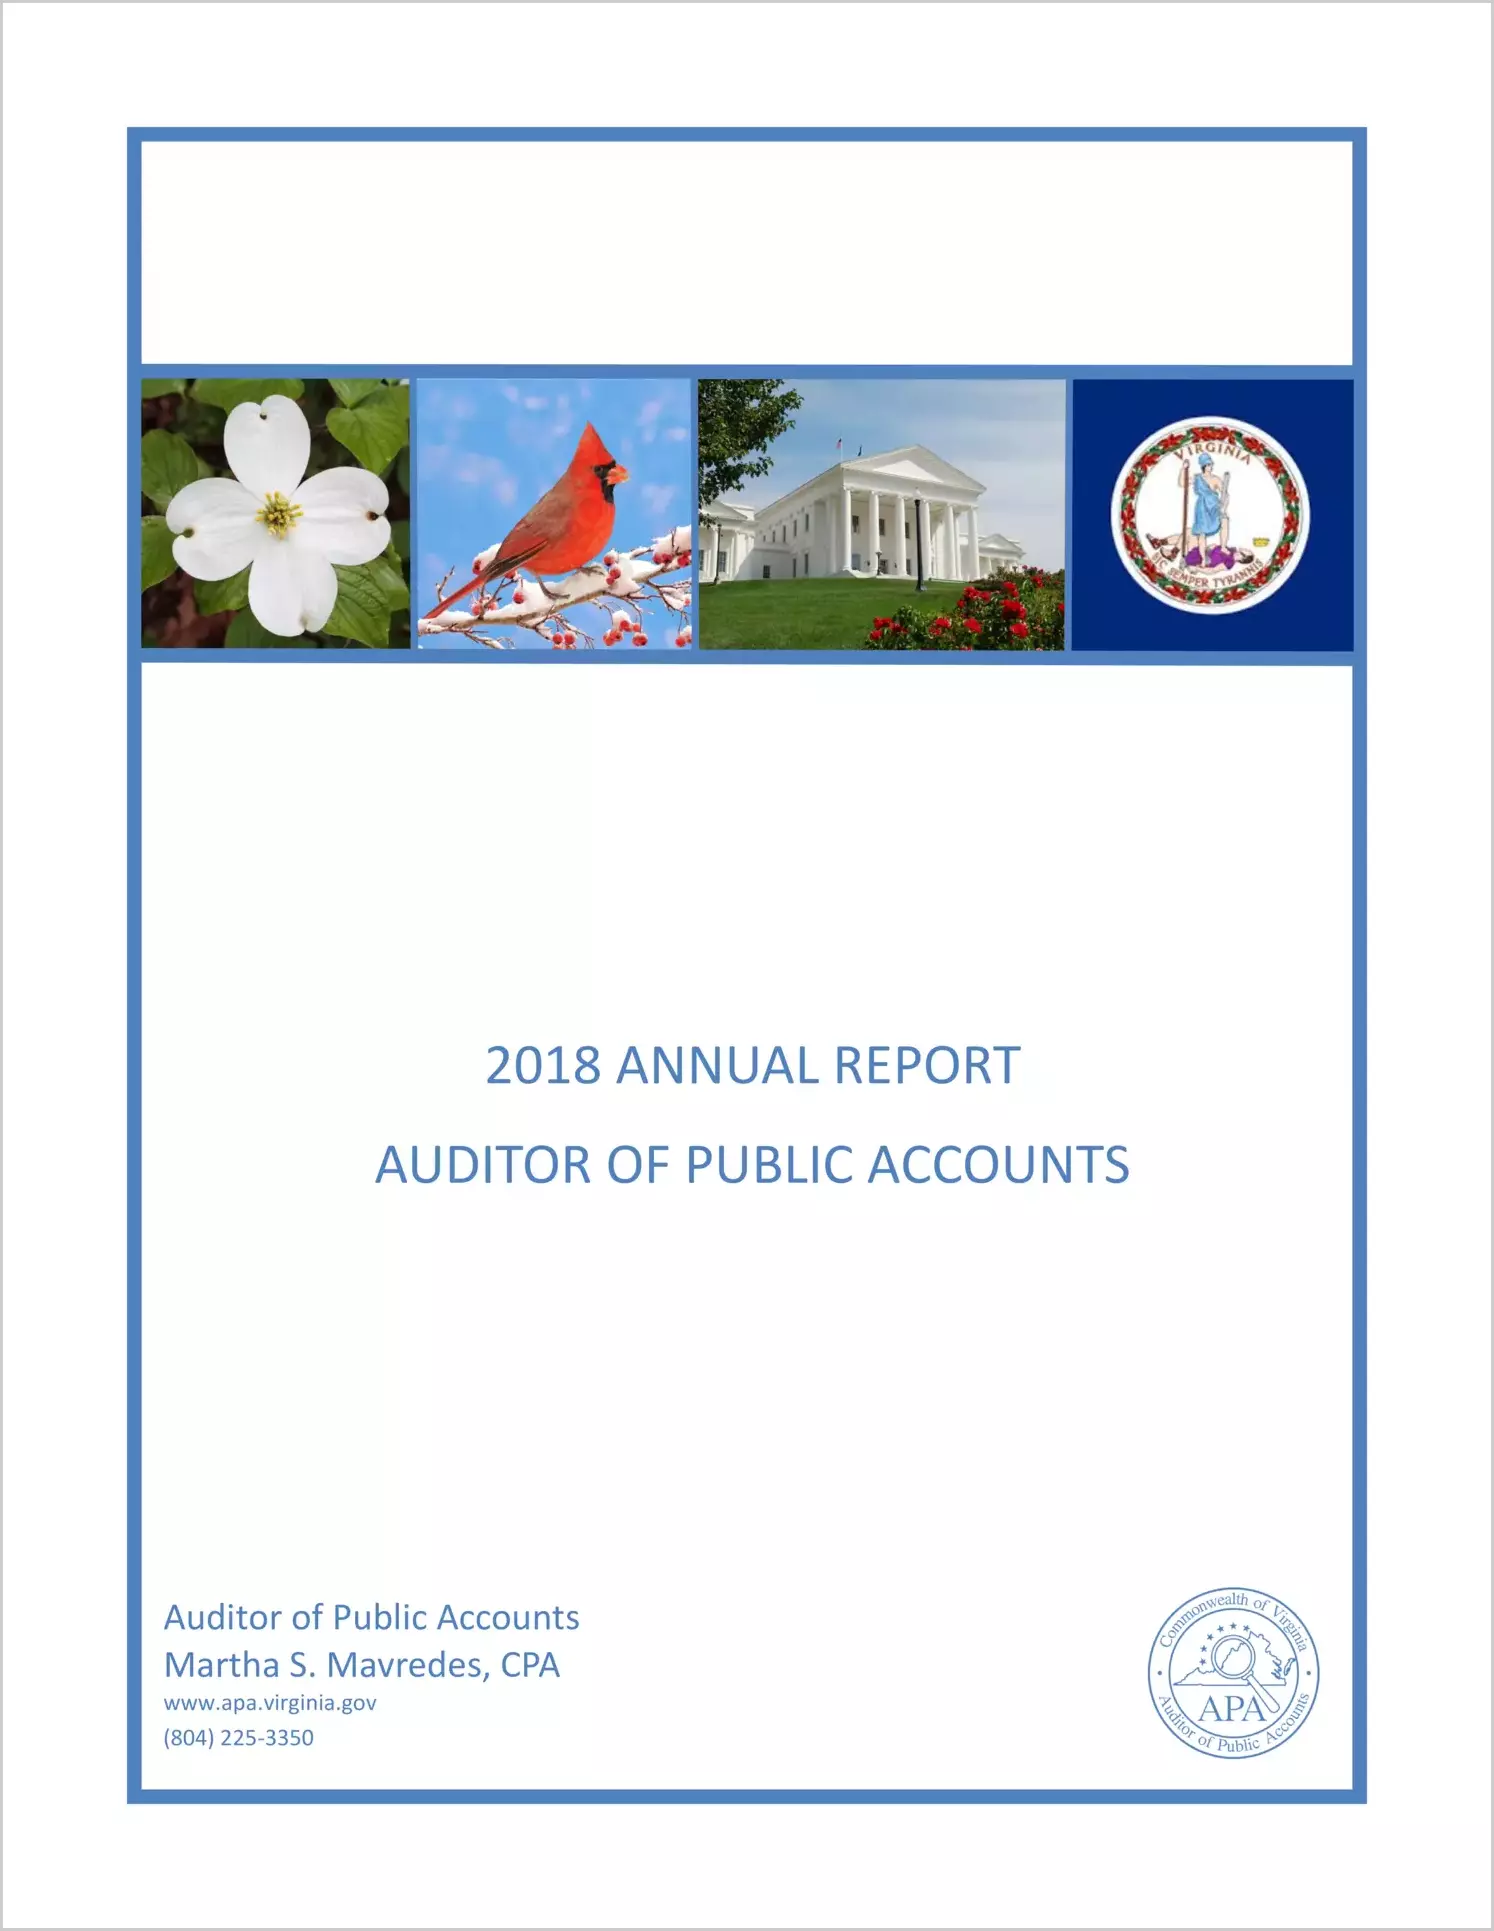 2018 Annual Report of the Auditor of Public Accounts